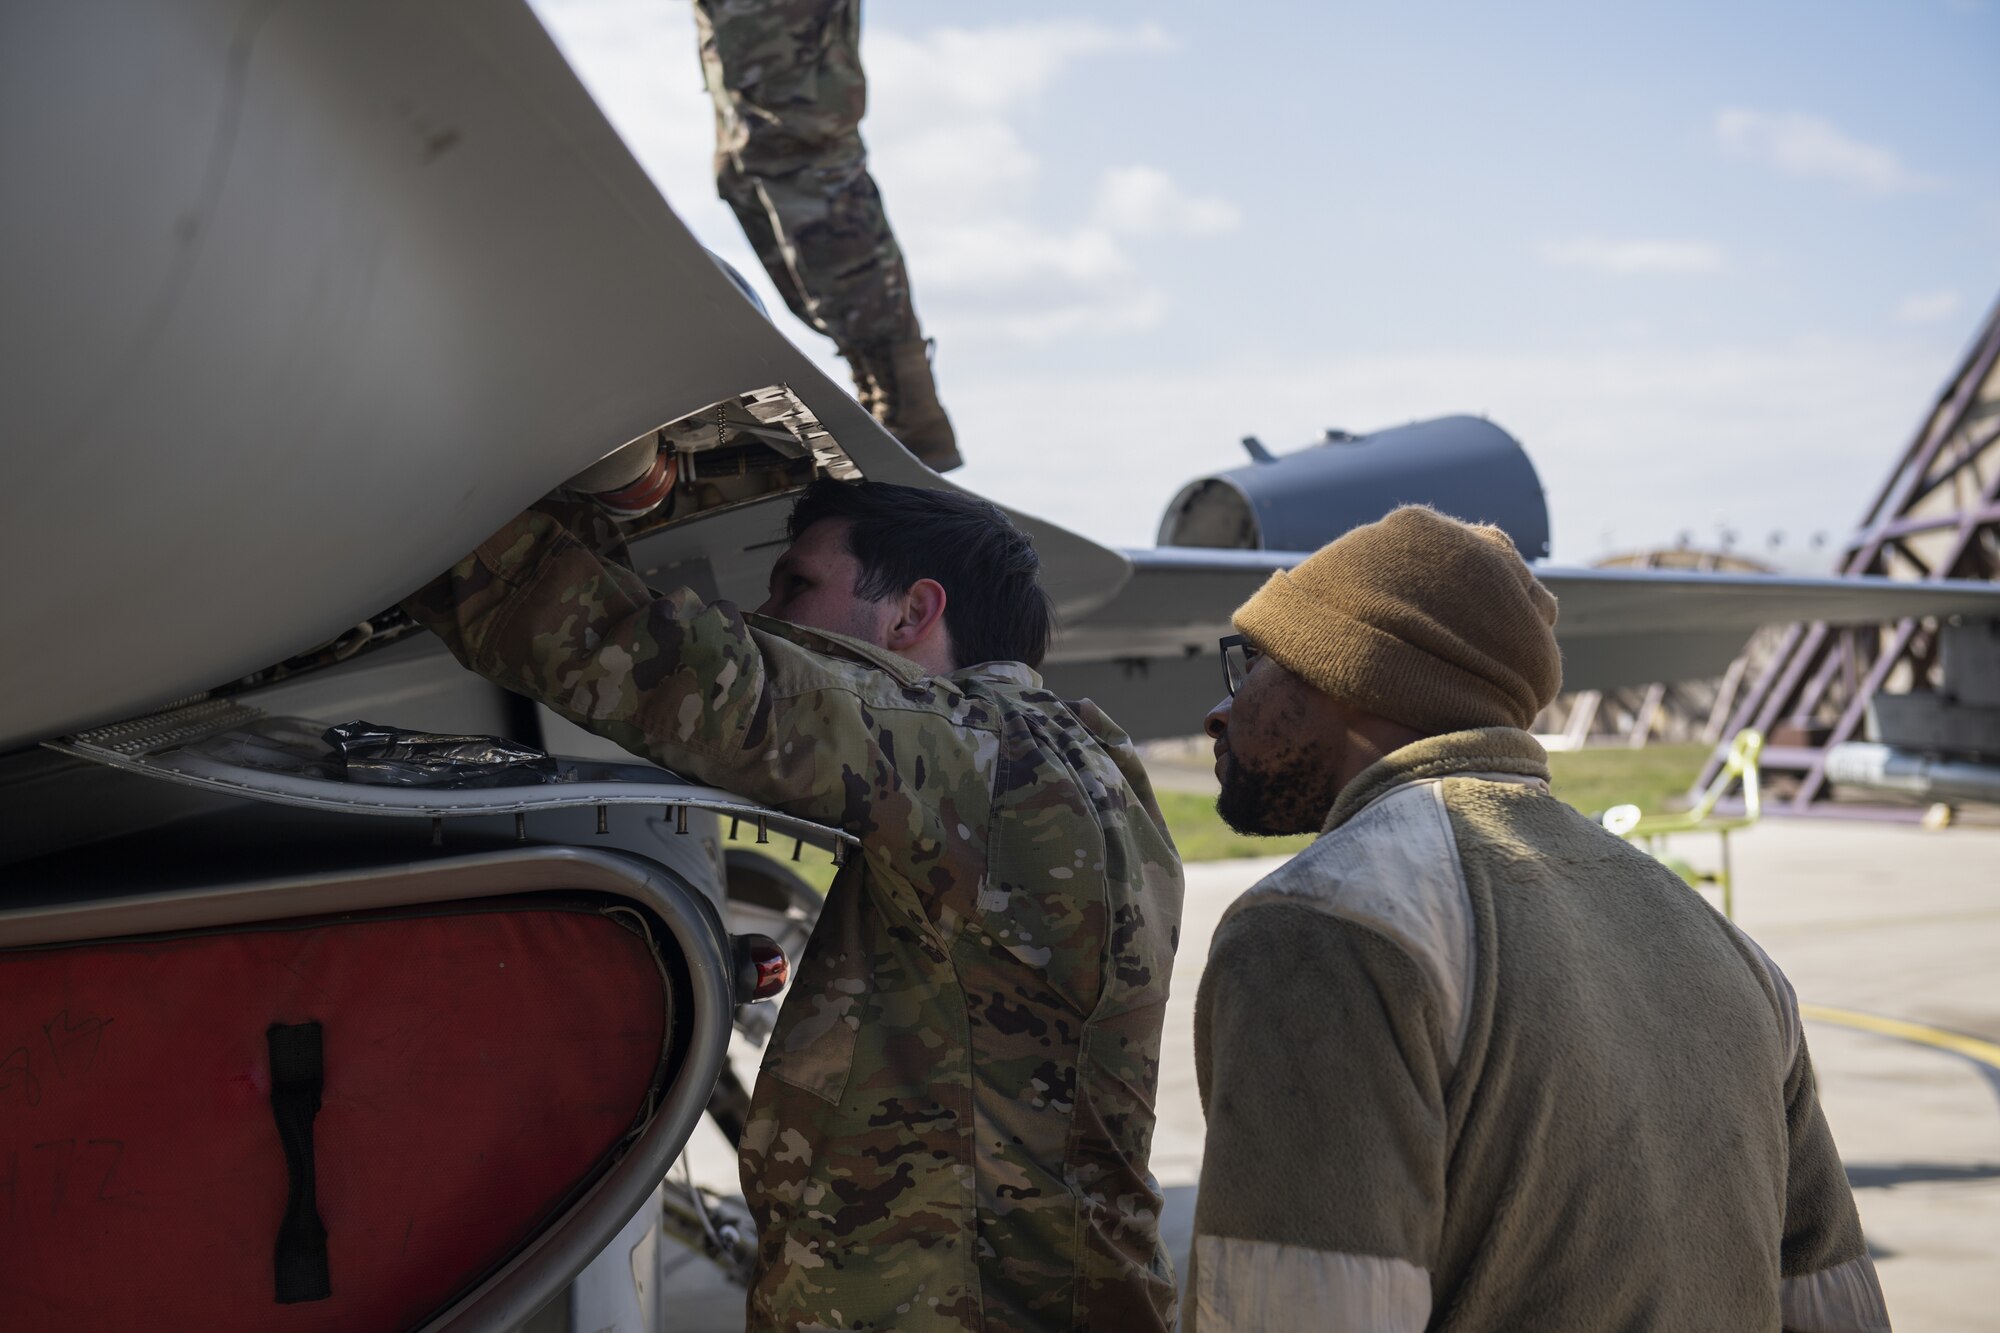 U.S Air Force Senior Airman Chase Peace, 52nd Aircraft Maintenance Squadron avionics specialist, left, and Senior Airman Tyler Logan, 52nd AMXS aerospace propulsion specialist, inspect the inside of a 480th Fighter Squadron F-16 Fighting Falcon before a flight for exercise Point Blank 21-02 at Spangdahlem Air Base, Germany, April 9, 2021. Pre-flight inspections are performed before each F-16 sortie and are one of the most important parts of a maintainer's duties. (U.S. Air Force photo by Senior Airman Ali Stewart)